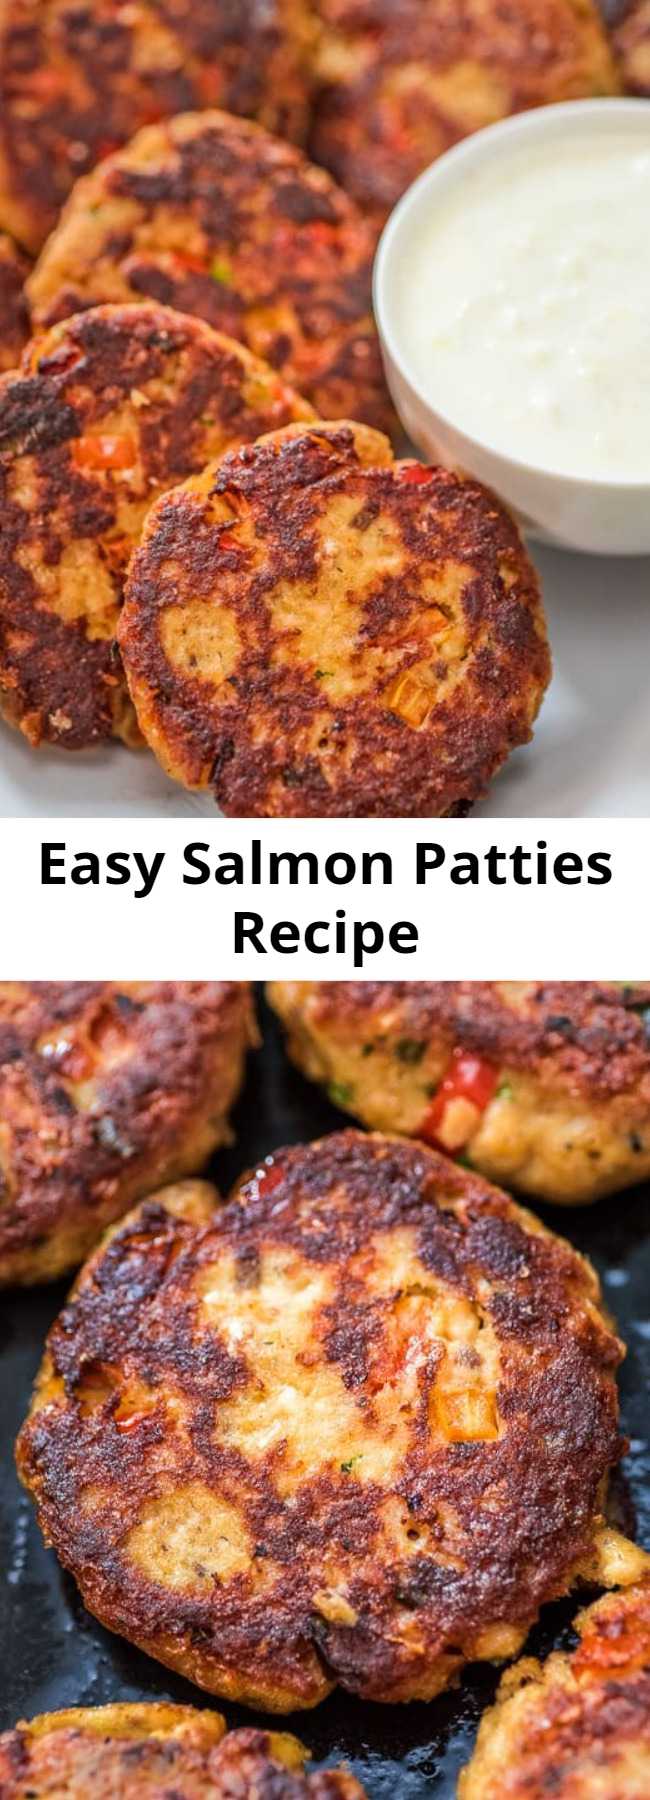 Easy Salmon Patties Recipe - This Easy Salmon Patty recipe is definitely a keeper. Made with canned salmon and simple ingredients, you’ll want to make it again and again. #dinner #lunch #salmon #fish #seafood #recipeoftheday